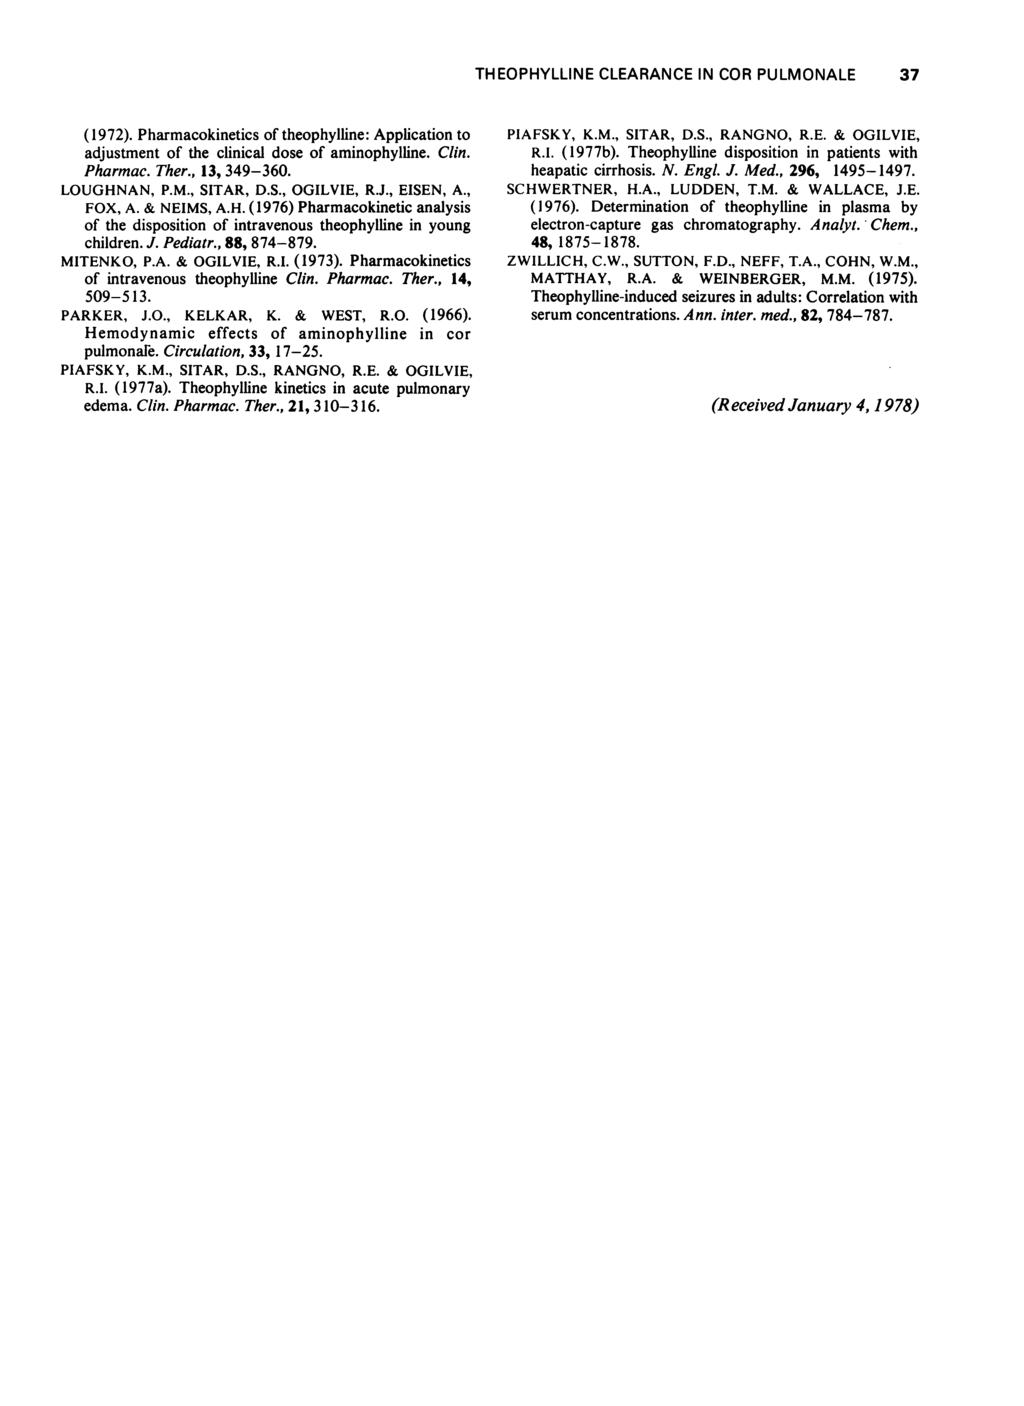 THEOPHYLLINE CLEARANCE IN COR PULMONALE 37 (1972). Pharmacokietics of theophyllie: Applicatio to adjustmet of the cliical dose of amiophyllie. Cli. Pharmac. Ther., 13, 349-36. LOUGHNAN, P.M., SITAR, D.